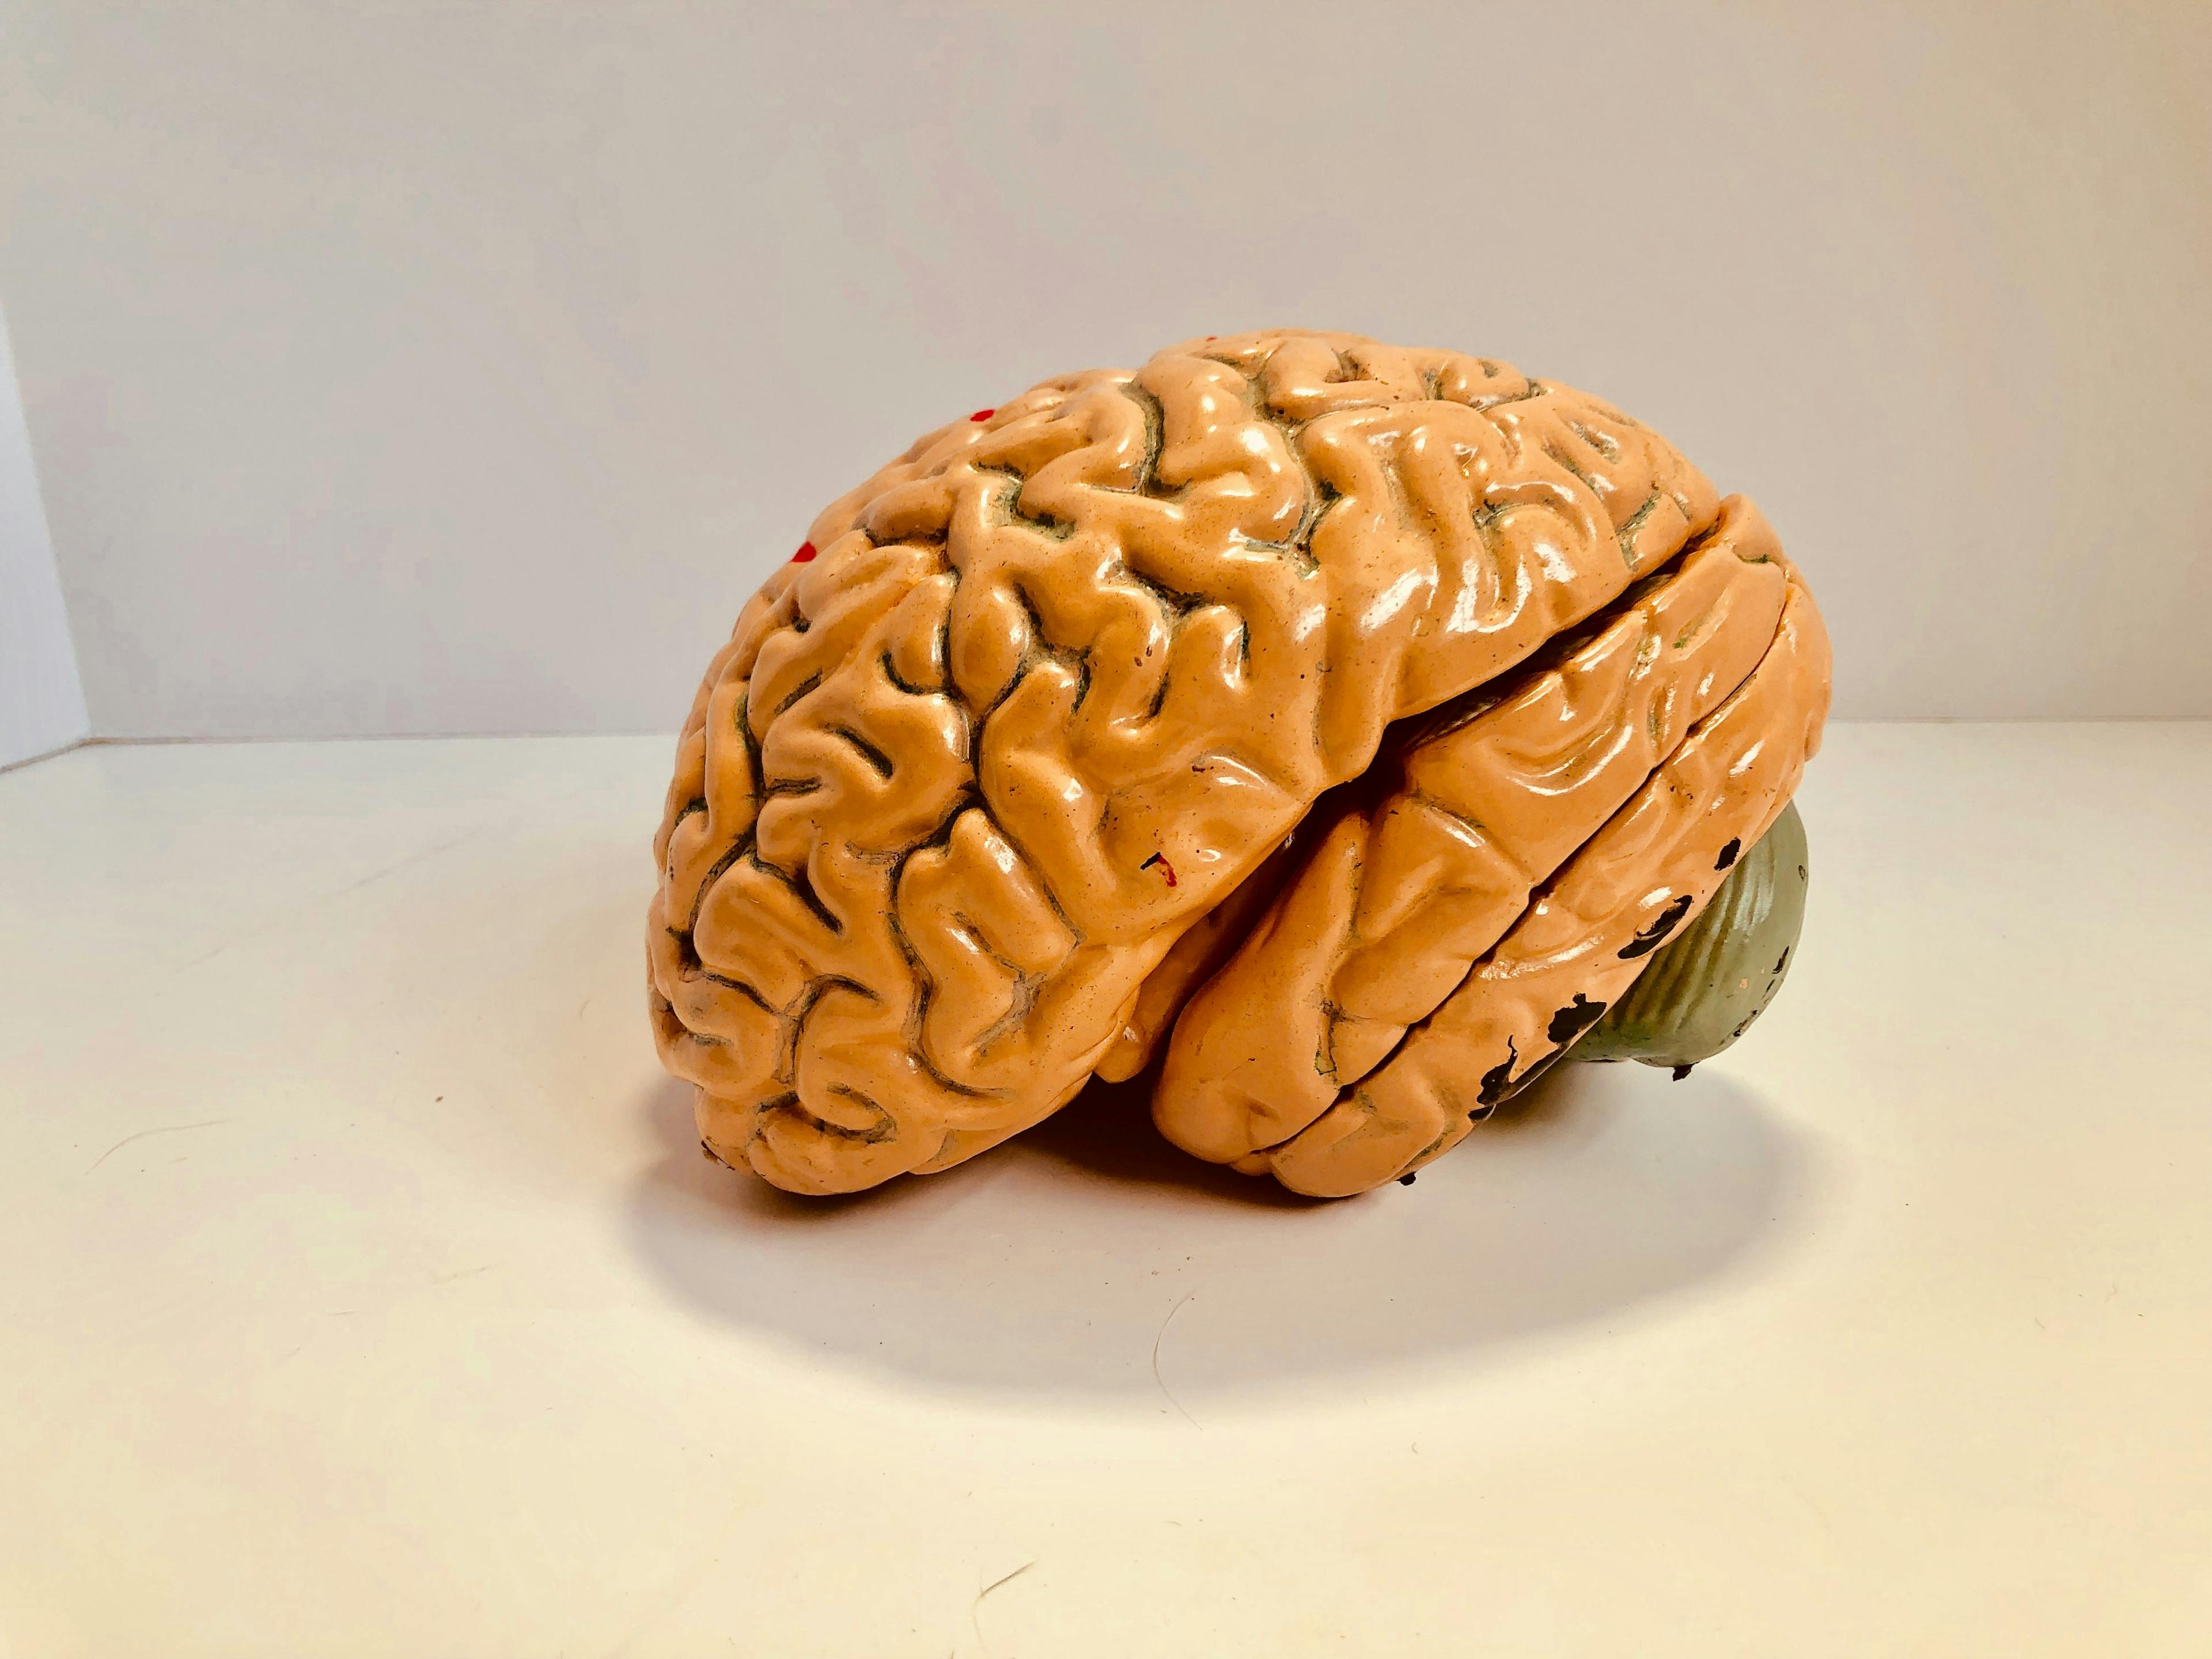 Anatomical model of a brain